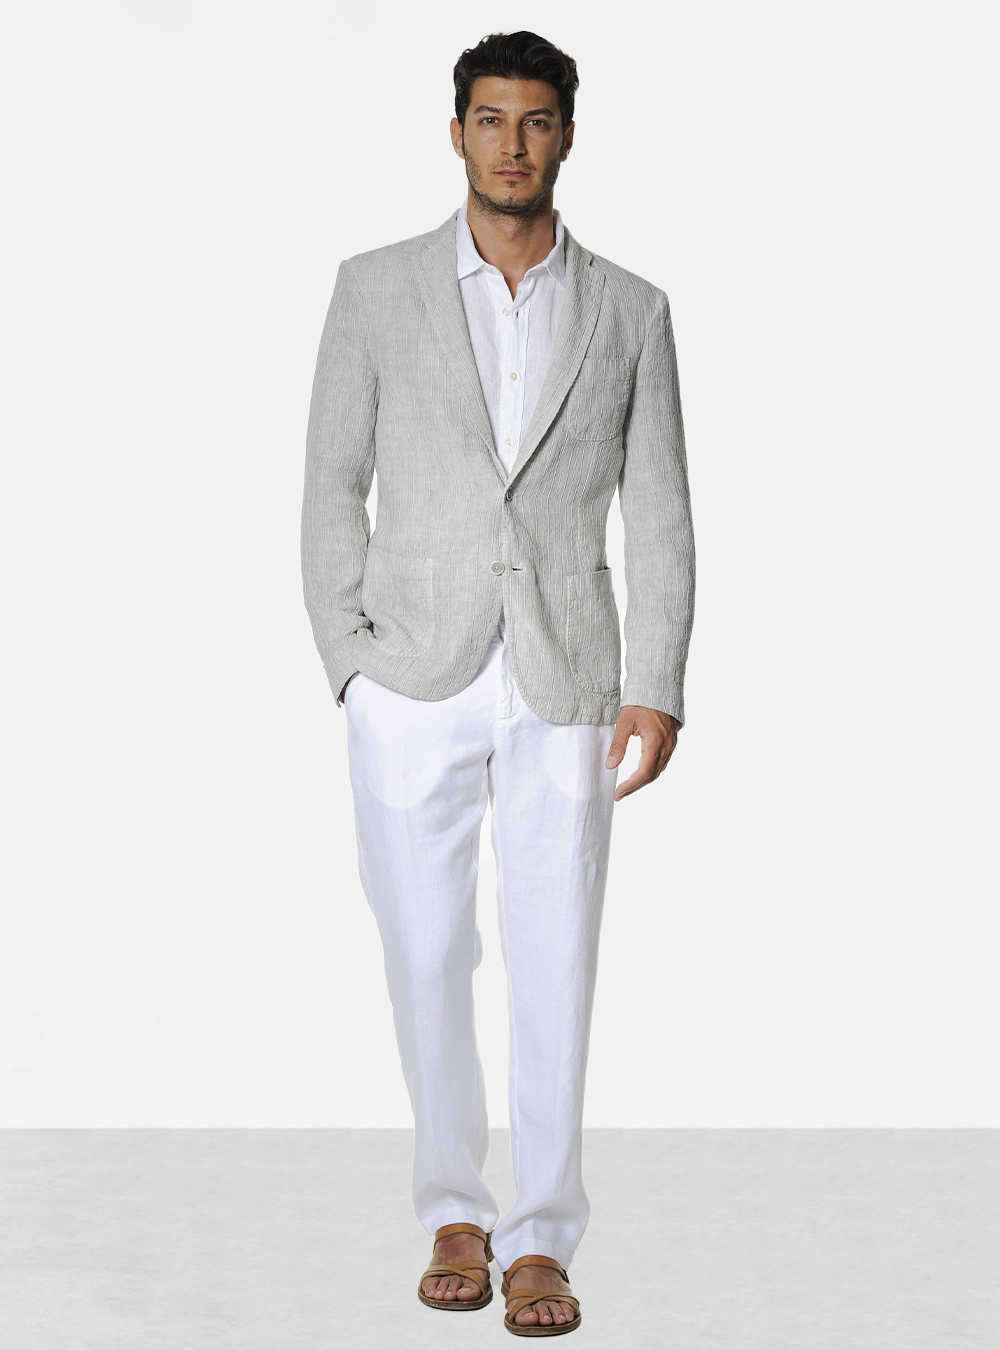 Casual Wedding Attire for Men - Suits Expert